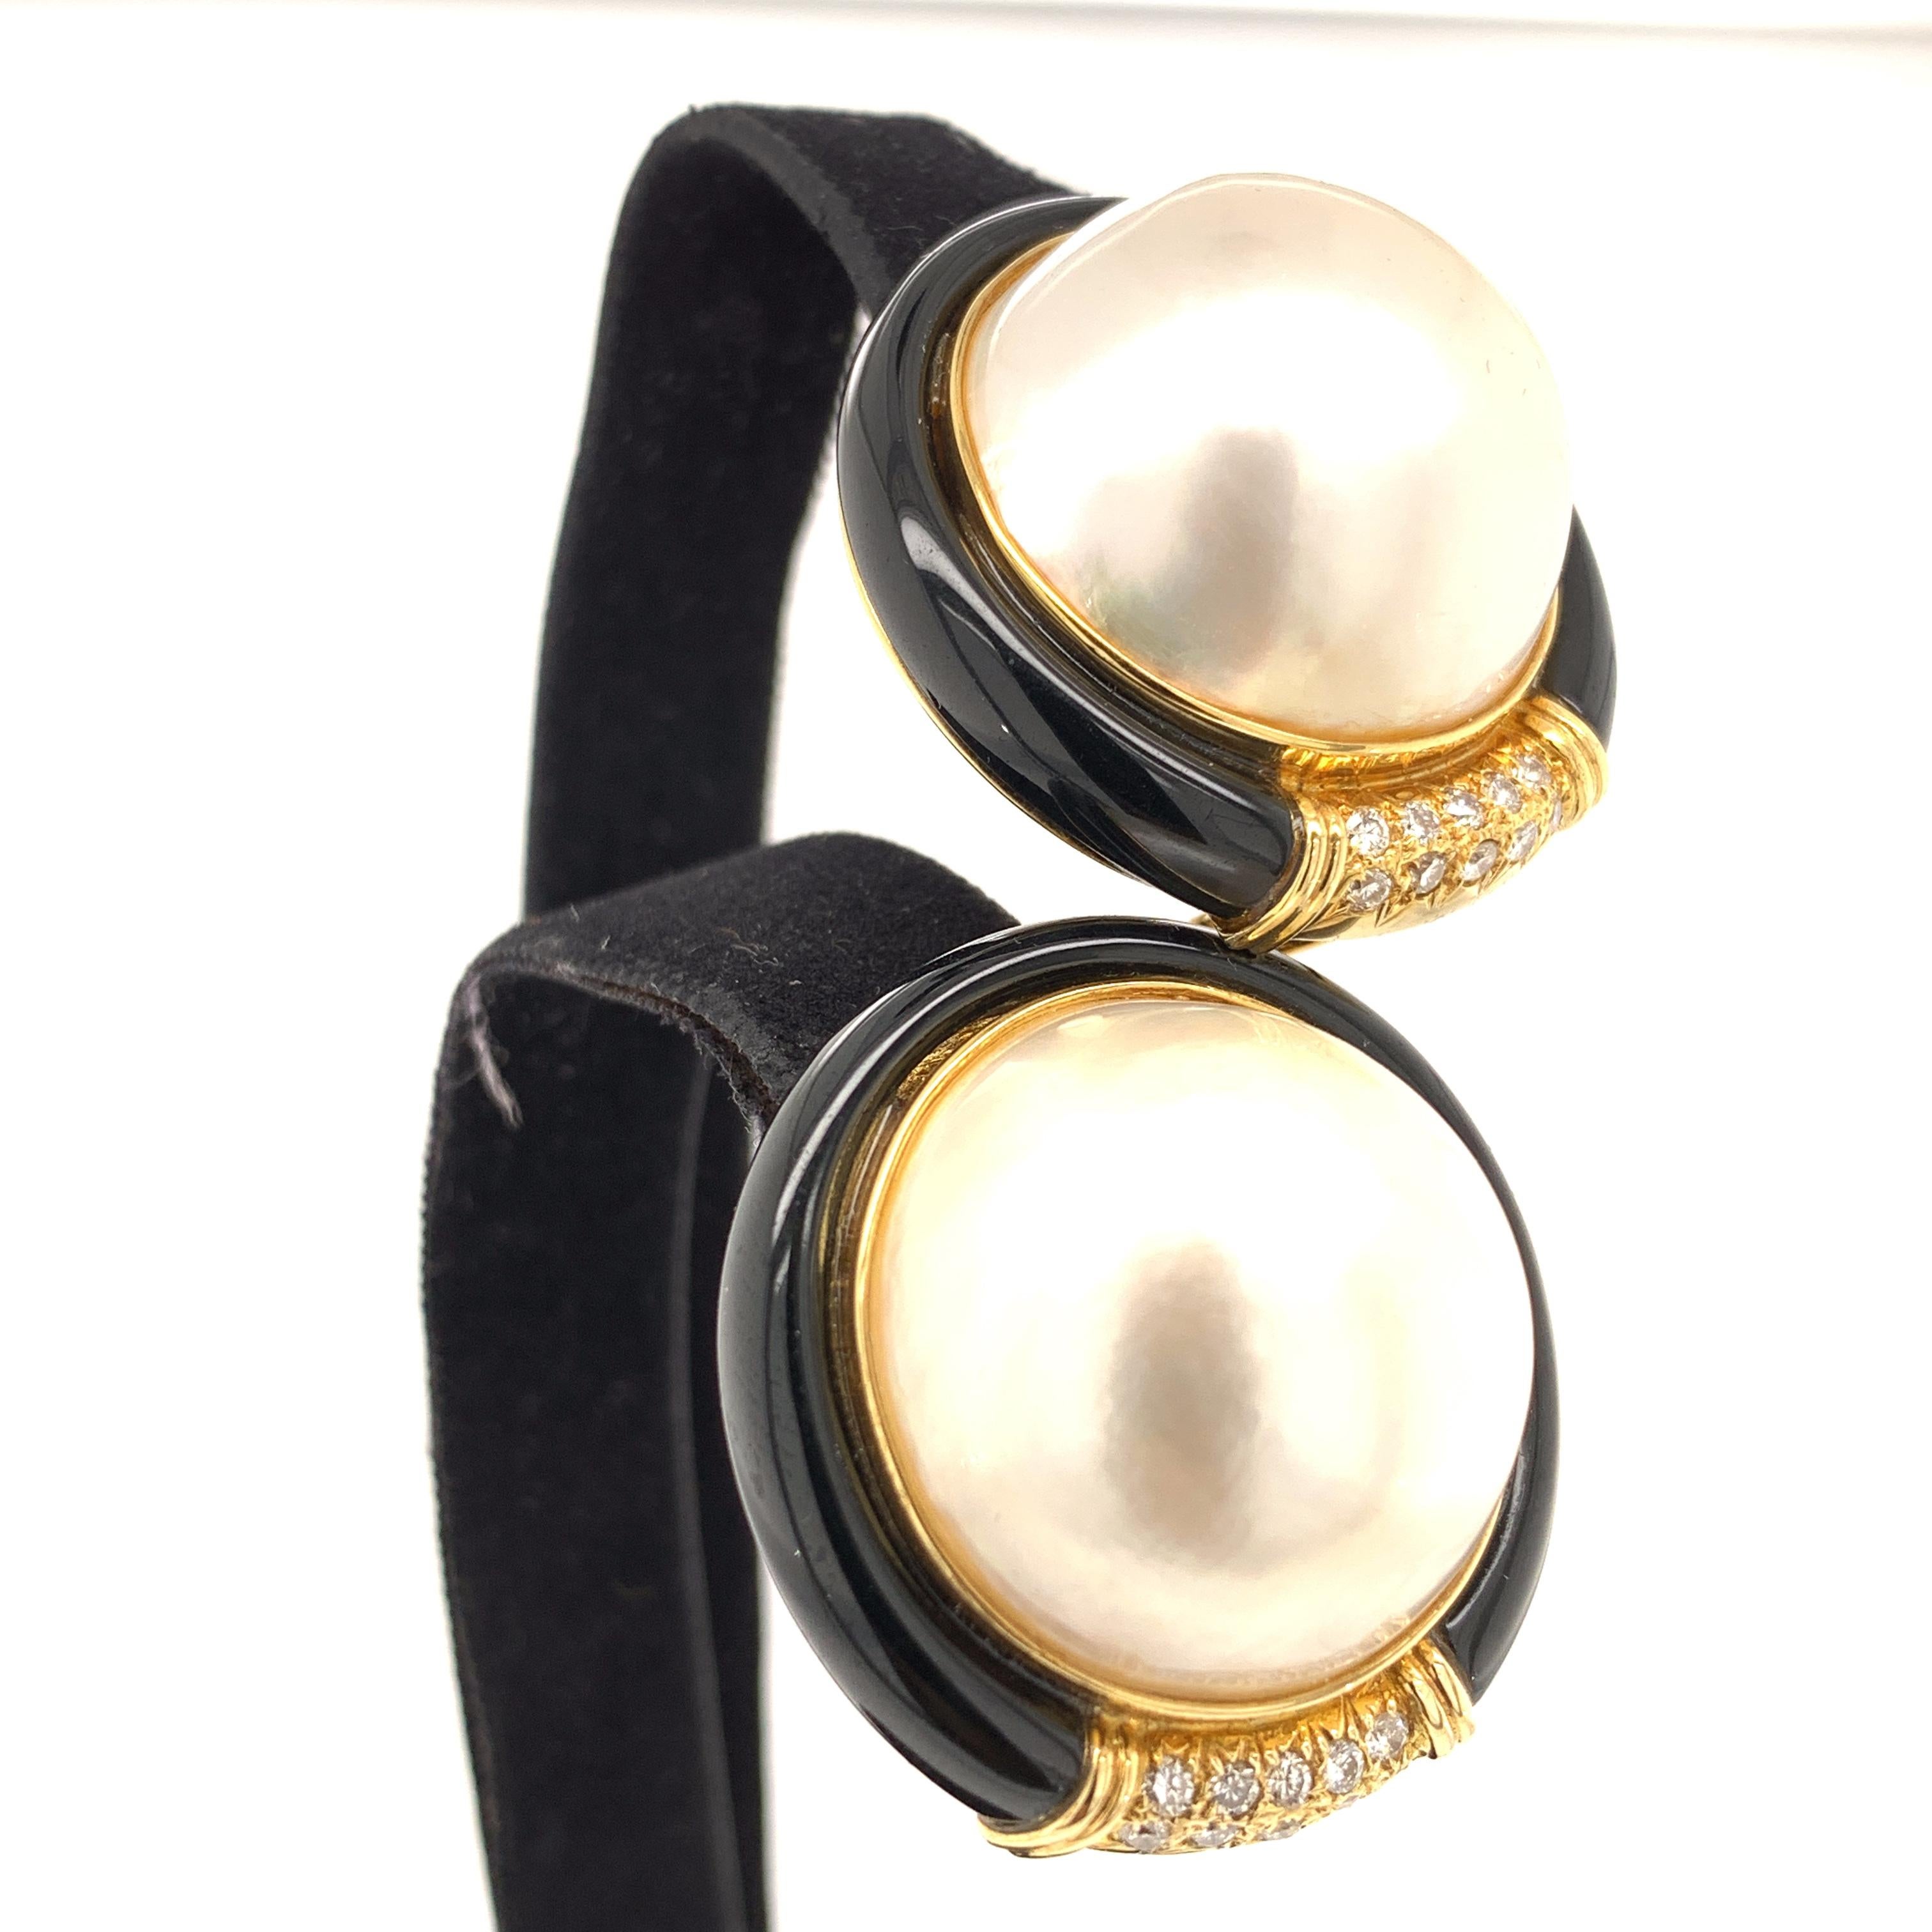 Mabe Pearl, Black Jade, and White Diamond Gold Earrings:

A beautiful and elegant pair of earrings, it features a pair of large Mabe pearls surrounded by black jade and white diamonds. The Mabe pearls are of fine quality with great lustre and